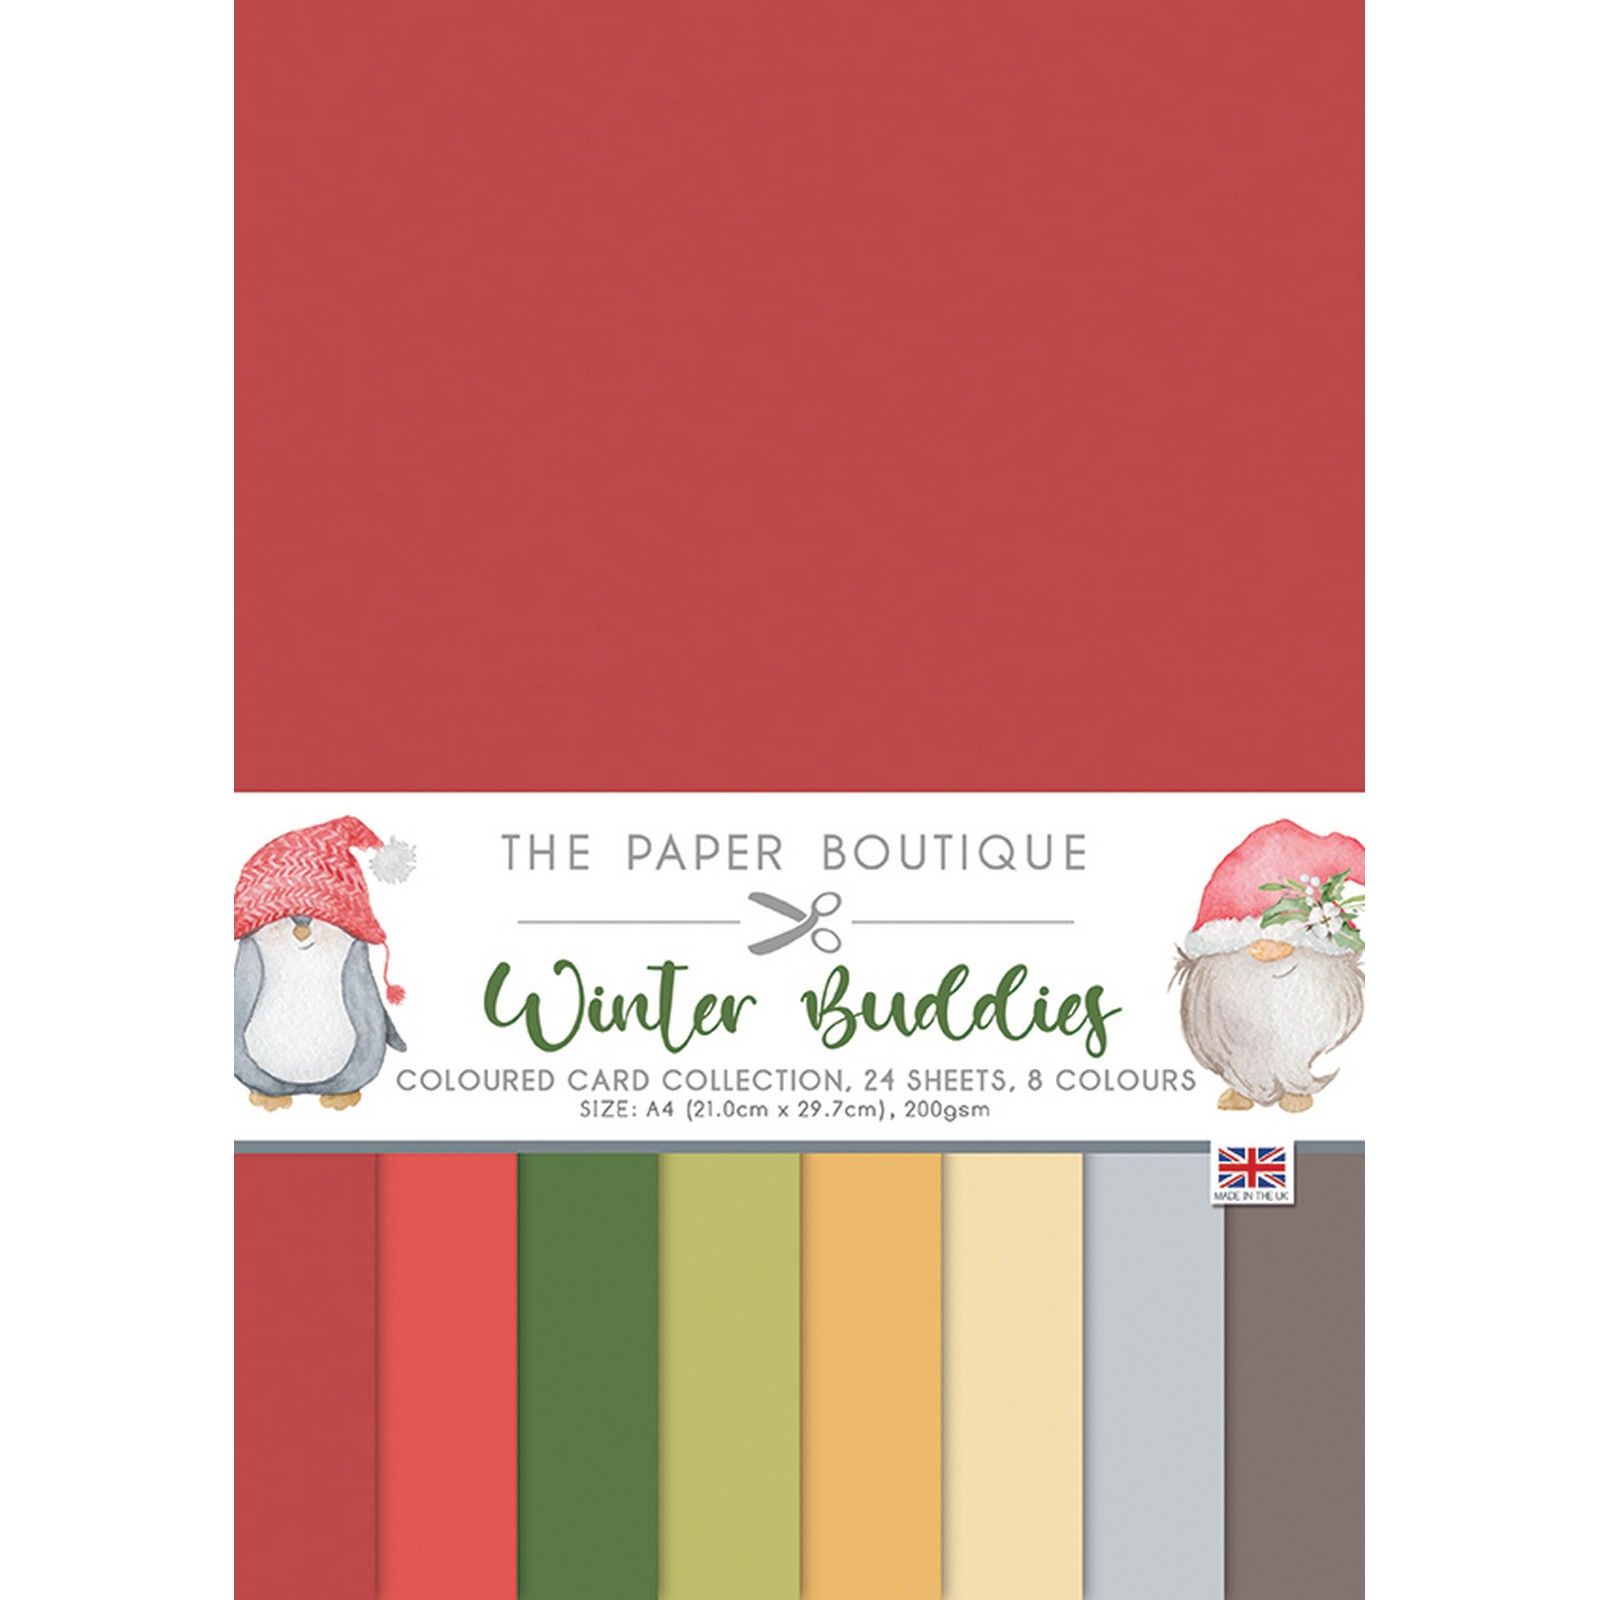 The Paper Boutique • Winter buddies colour card collection